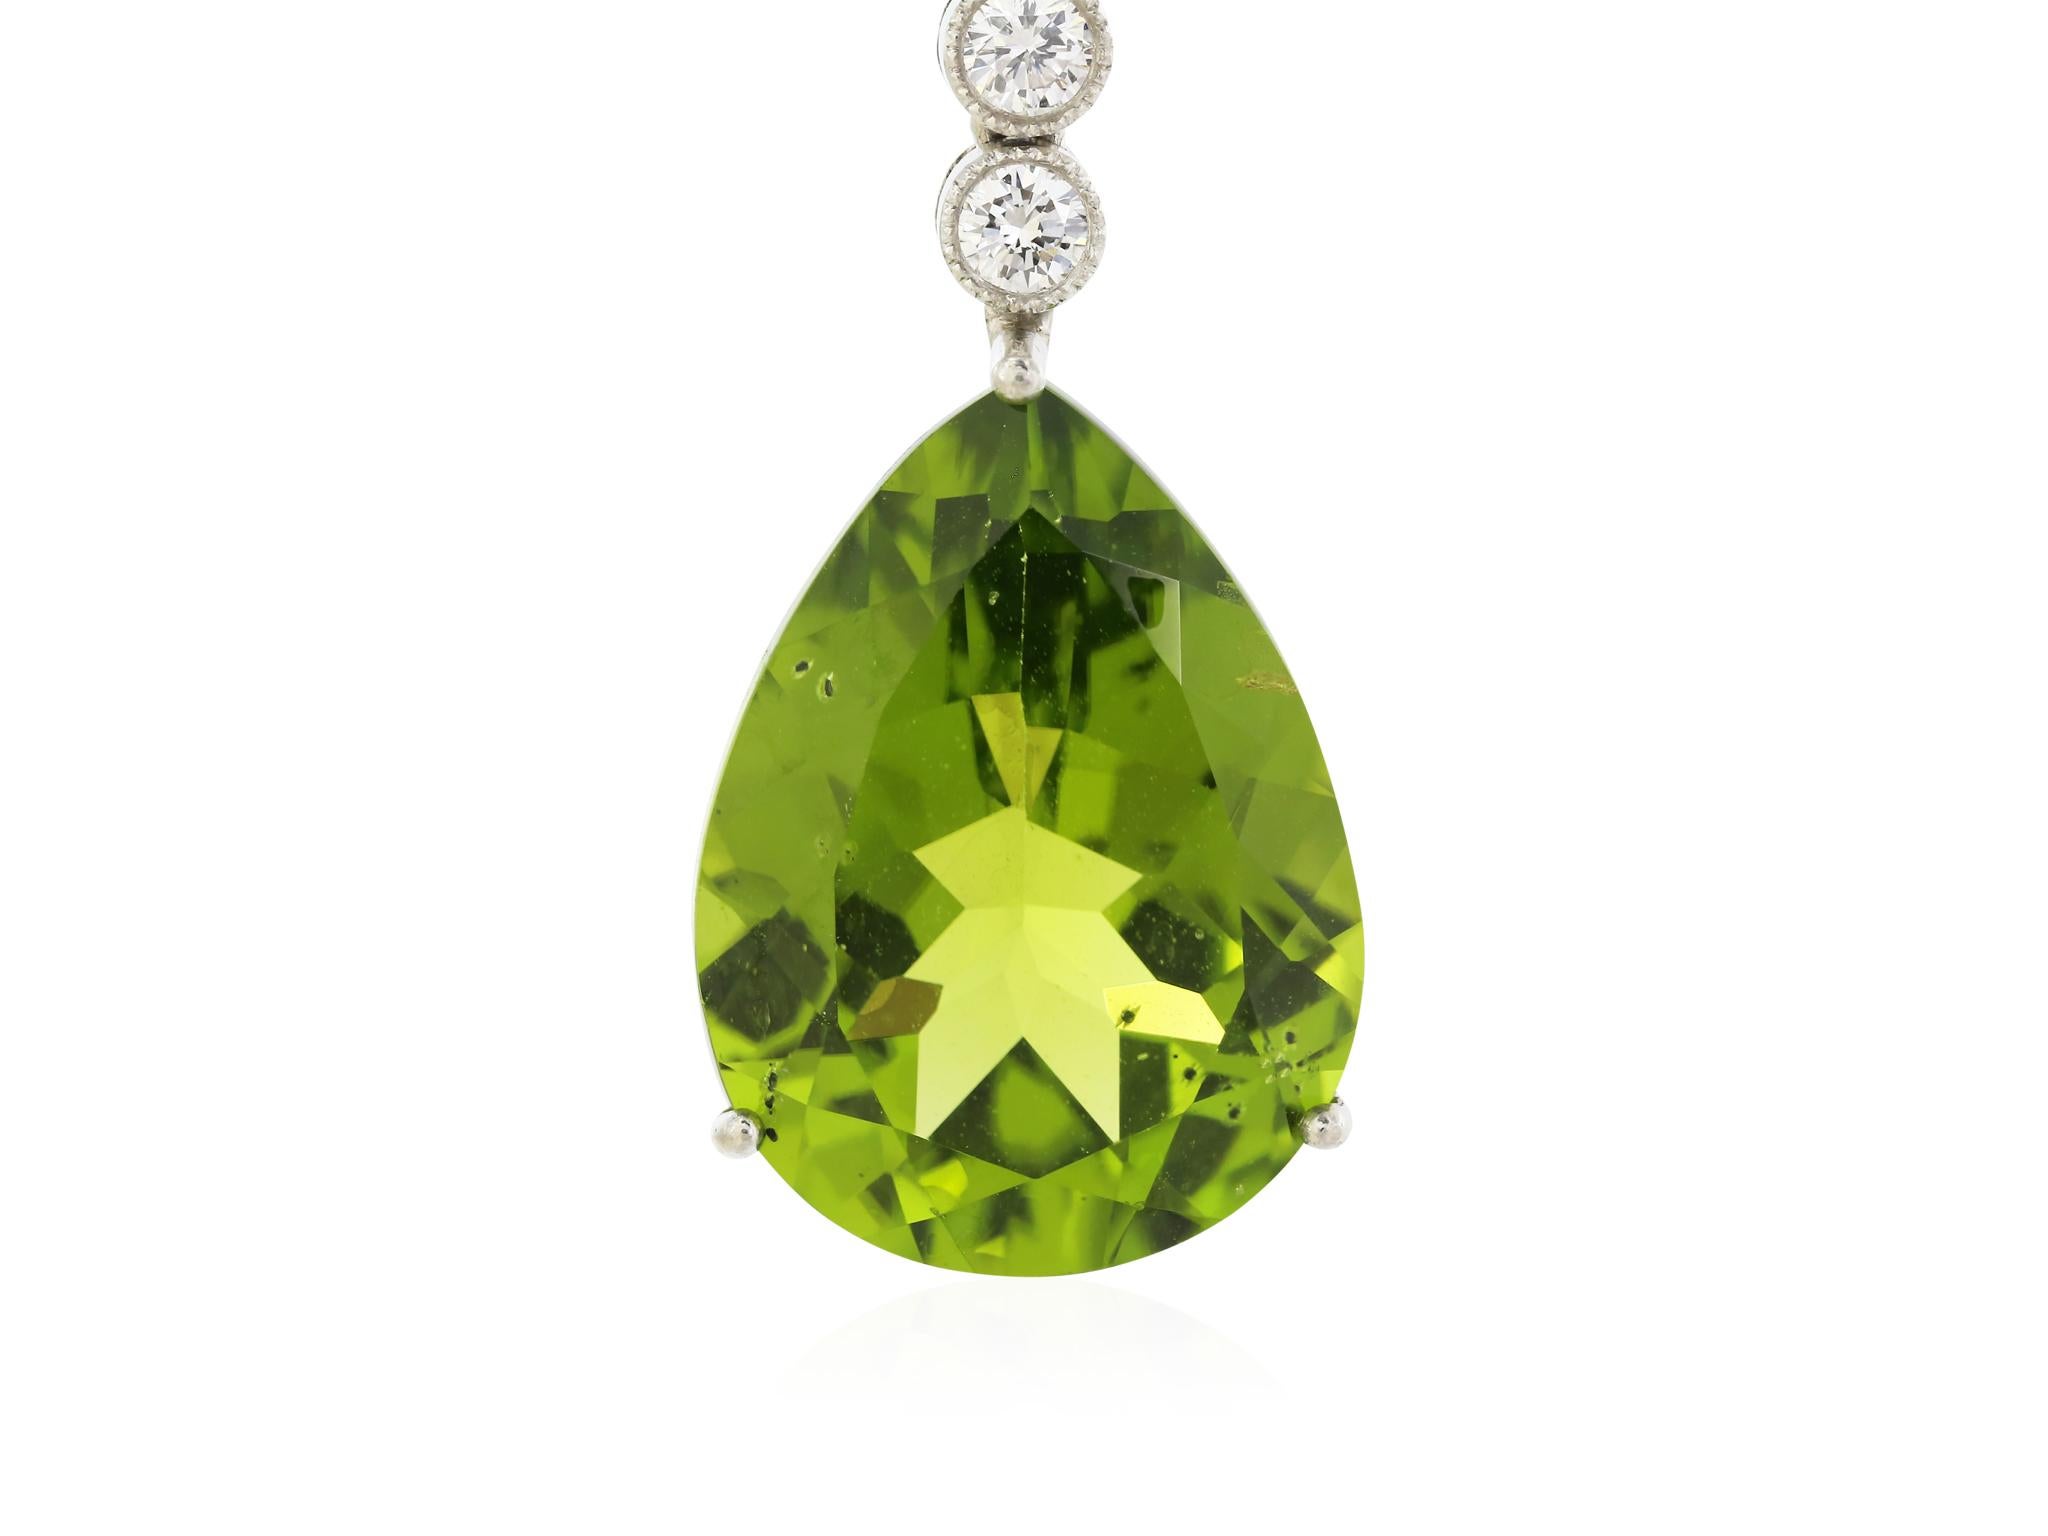 18 karat white gold peridot and diamond drop earrings with milgrain detail, featuring two pear shaped peridot's with a total weight of 15.50 carats, accented by a total of 1.60 carats of diamonds and two onyx beads.